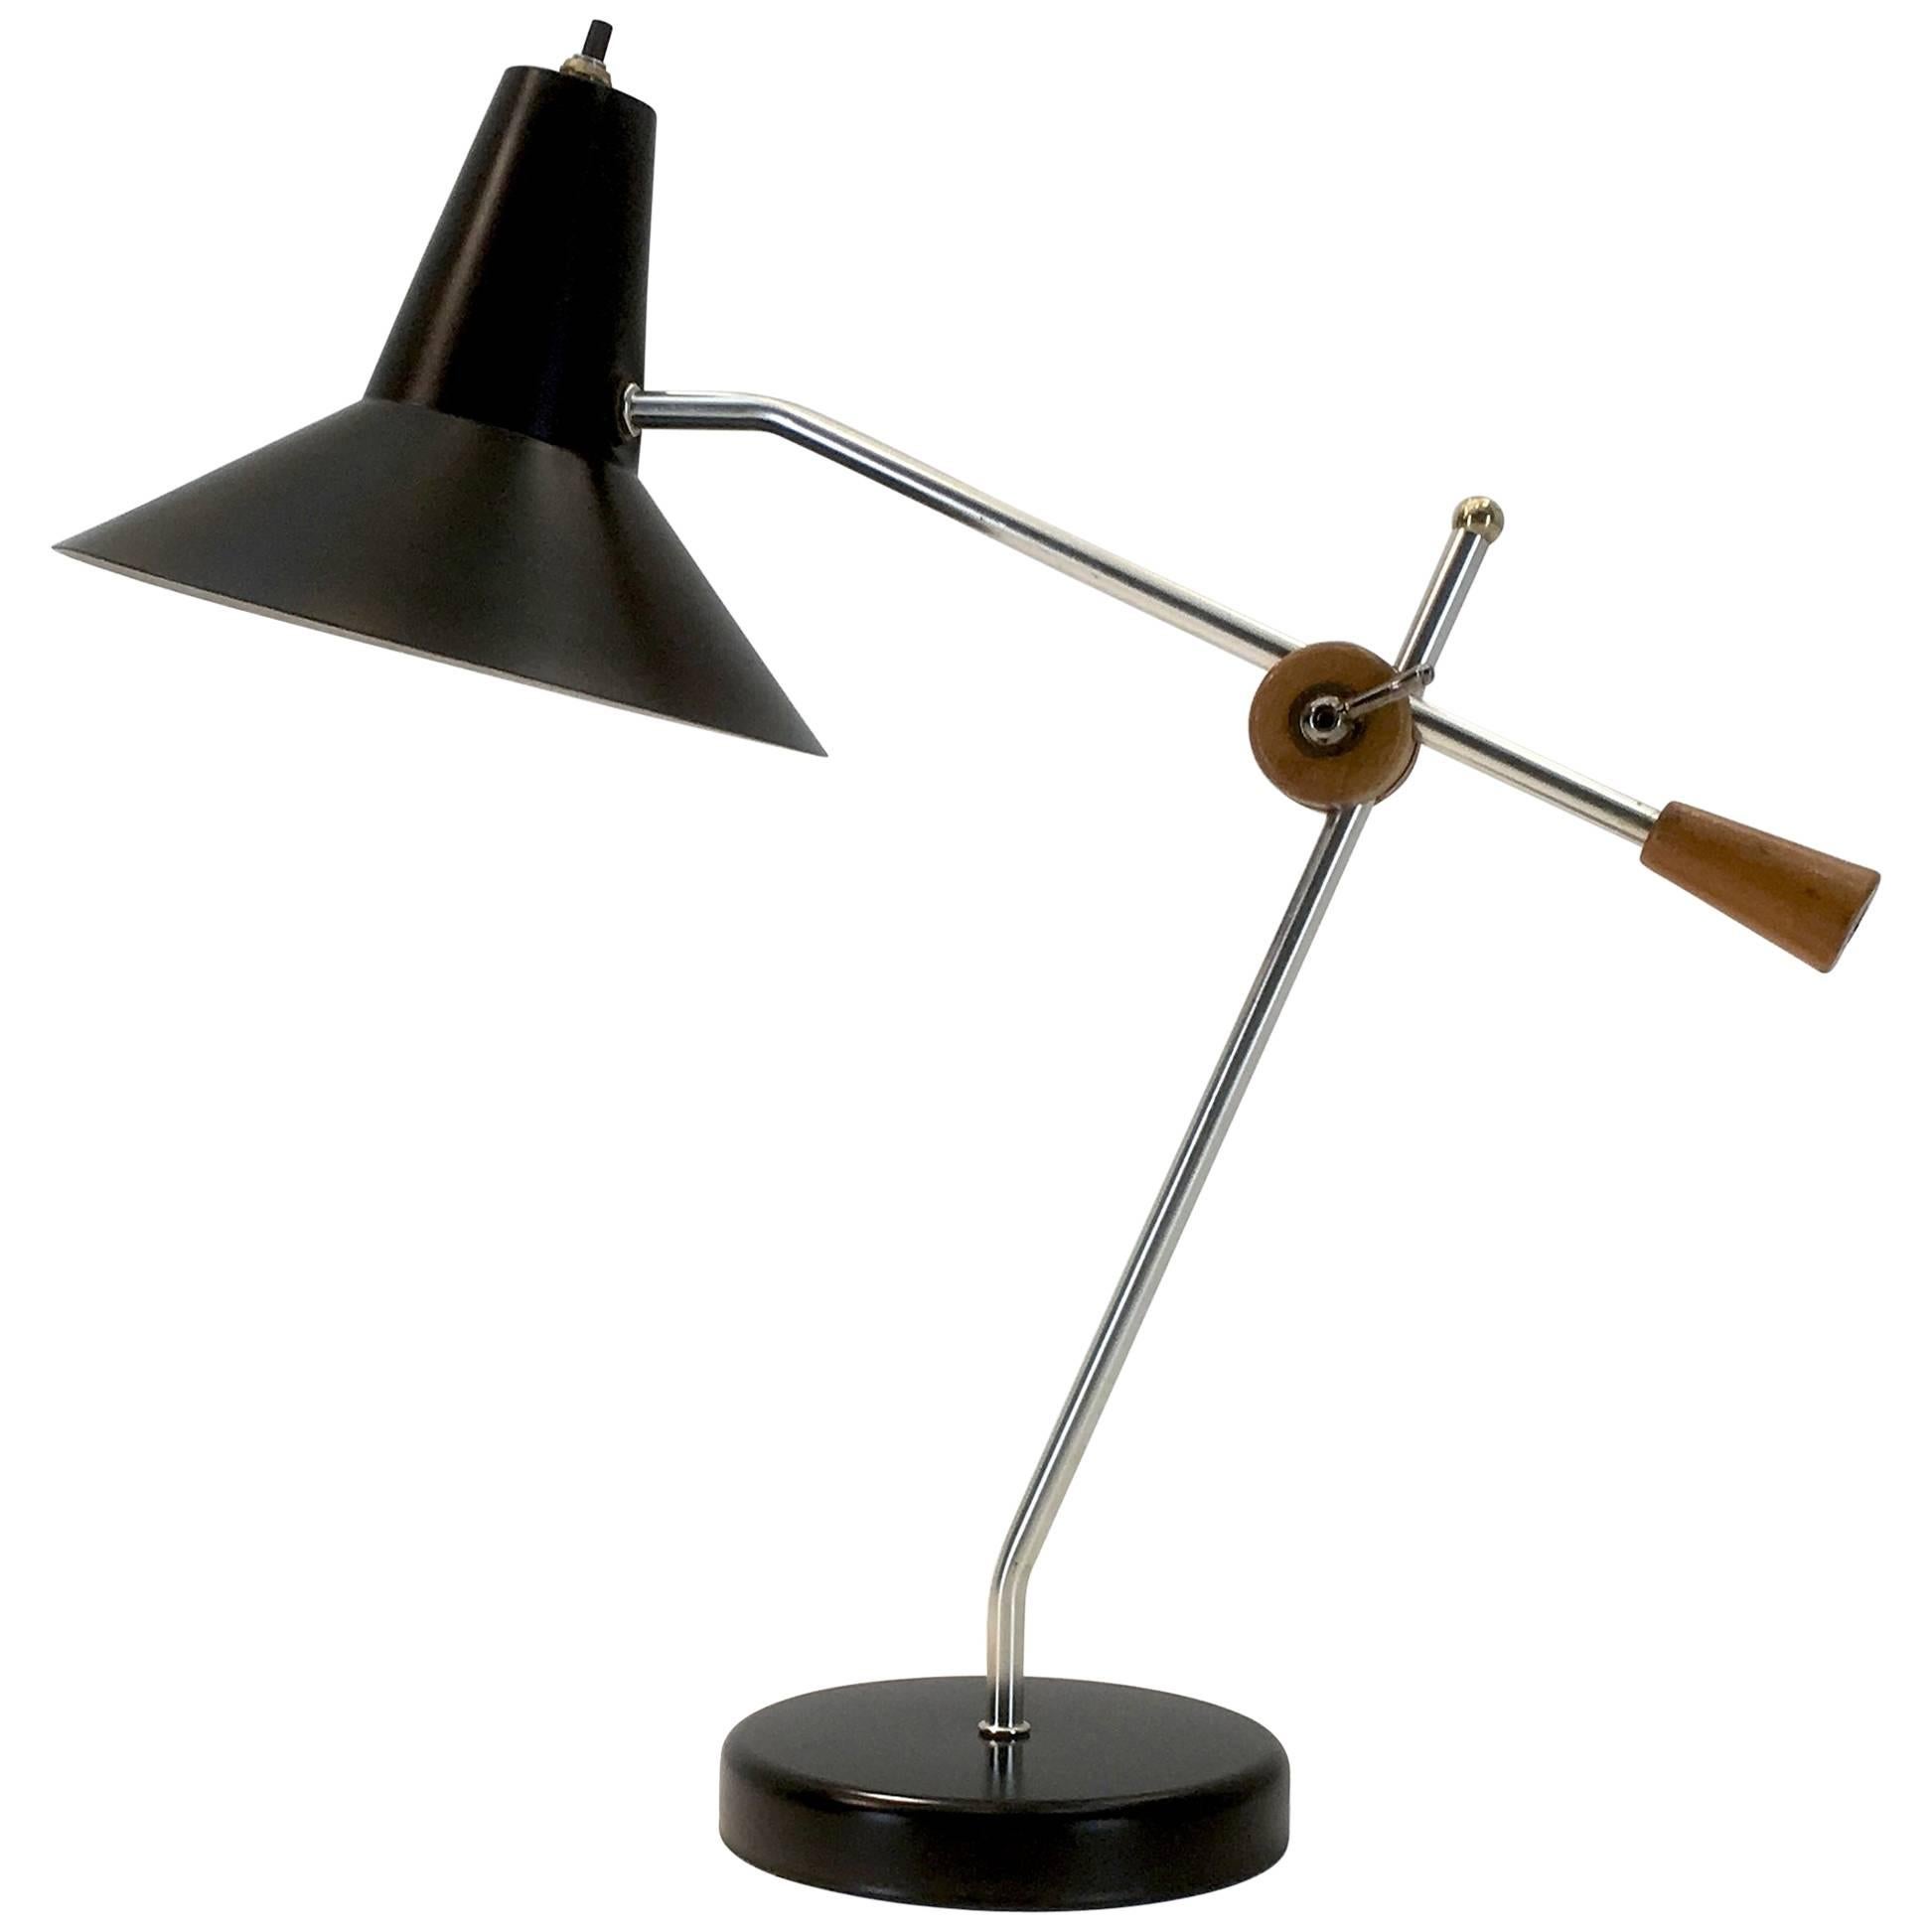 Exceptional Articulating Desk Lamp with Wood and Steel Features